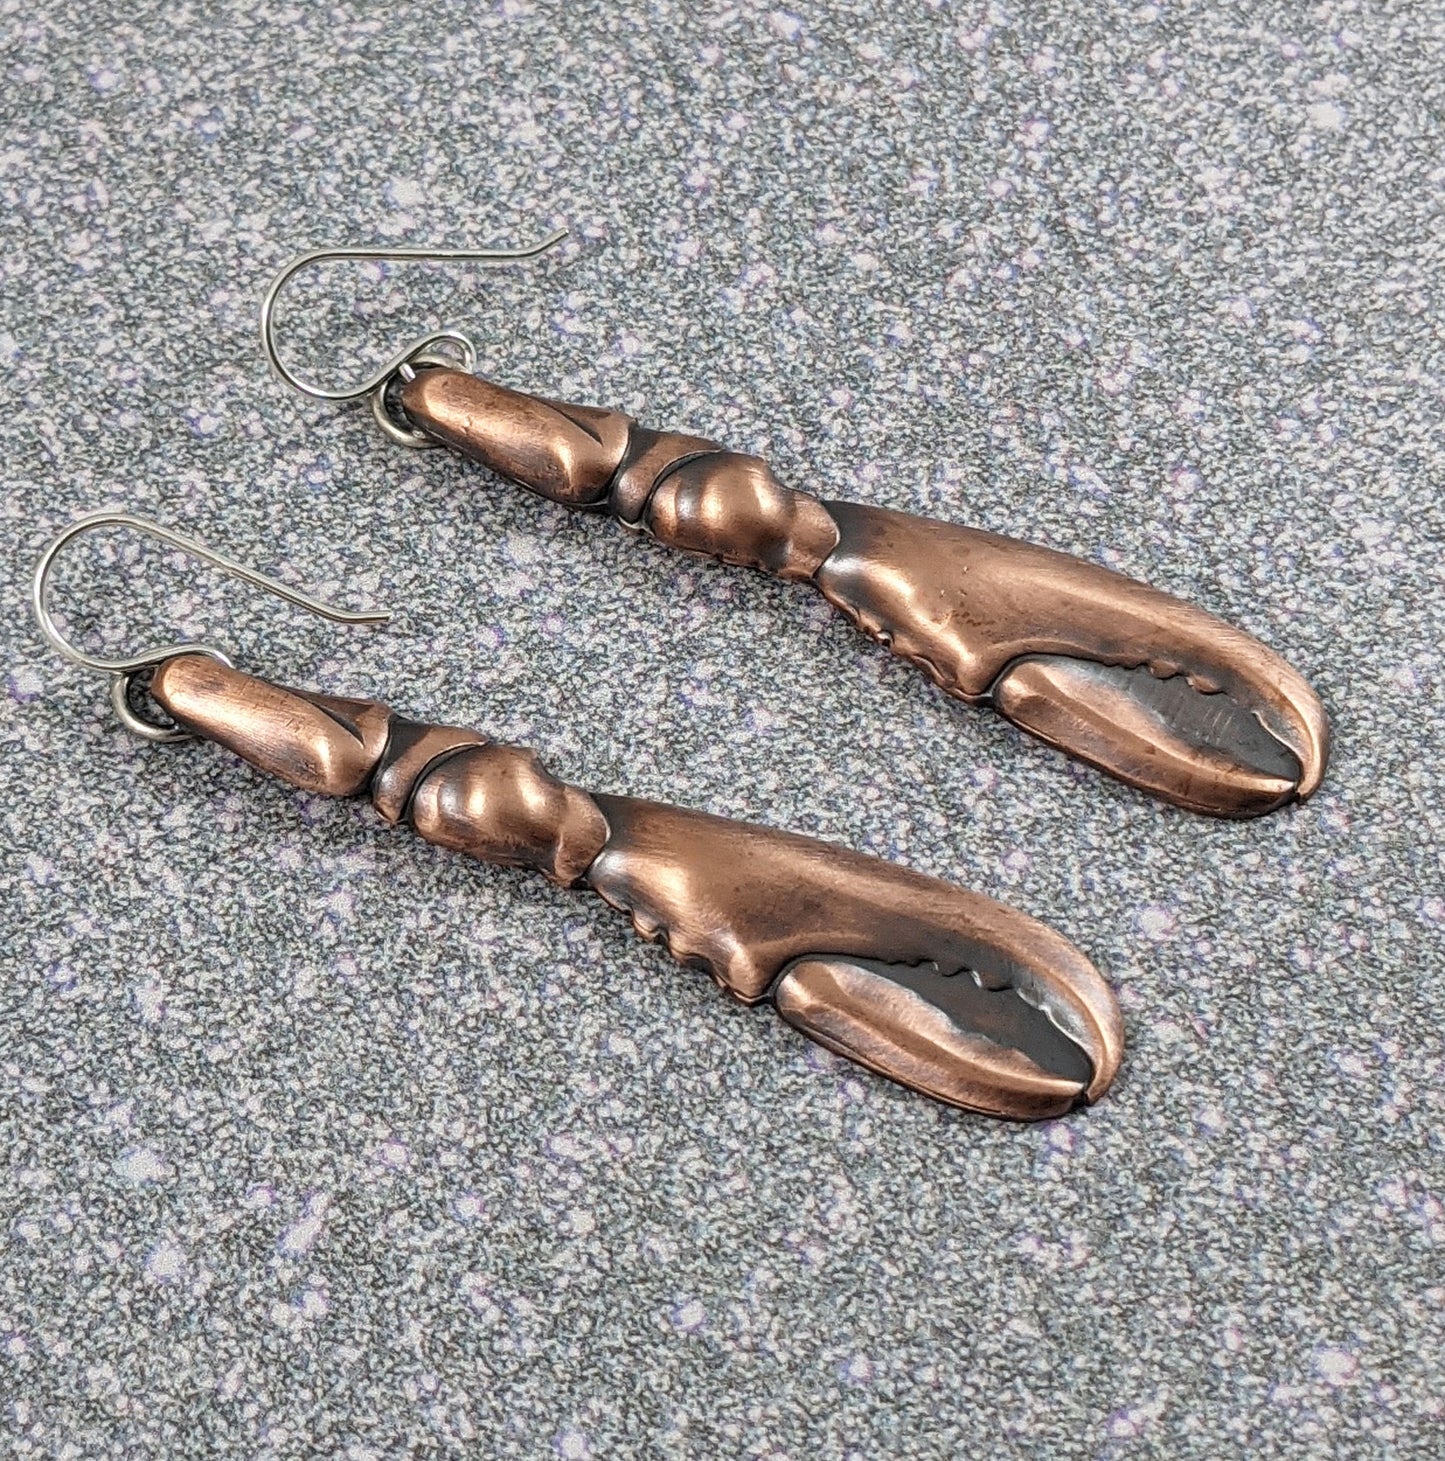 Copper earrings in the shape of a lobster claw. The claws are three dimensional and are on sterling silver ear wires. Posed on a gray background